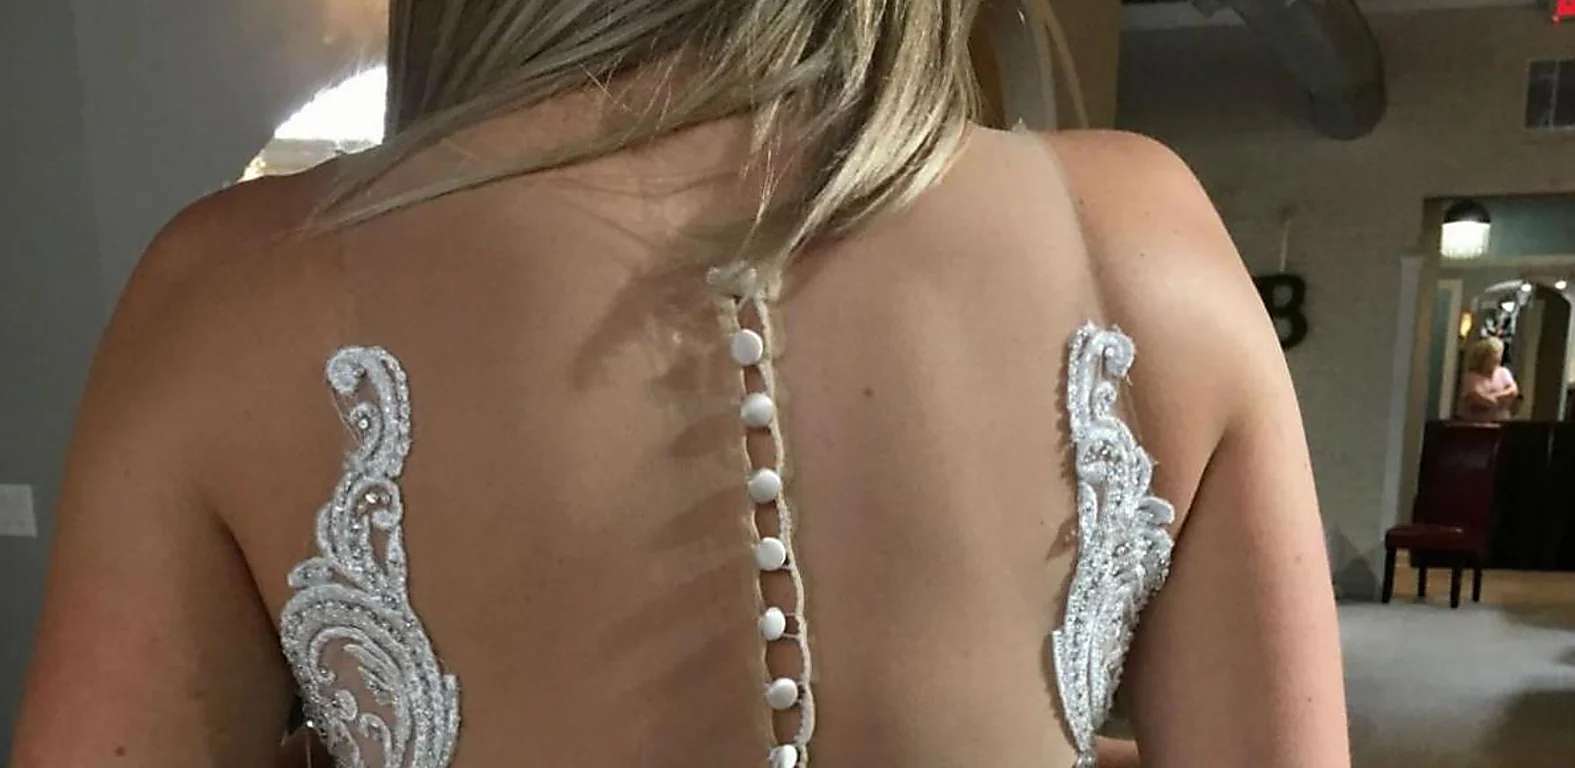 Outbrain Ad Example 42143 - [Photos] This Wedding Dress Made Guests Truly Uncomfortable